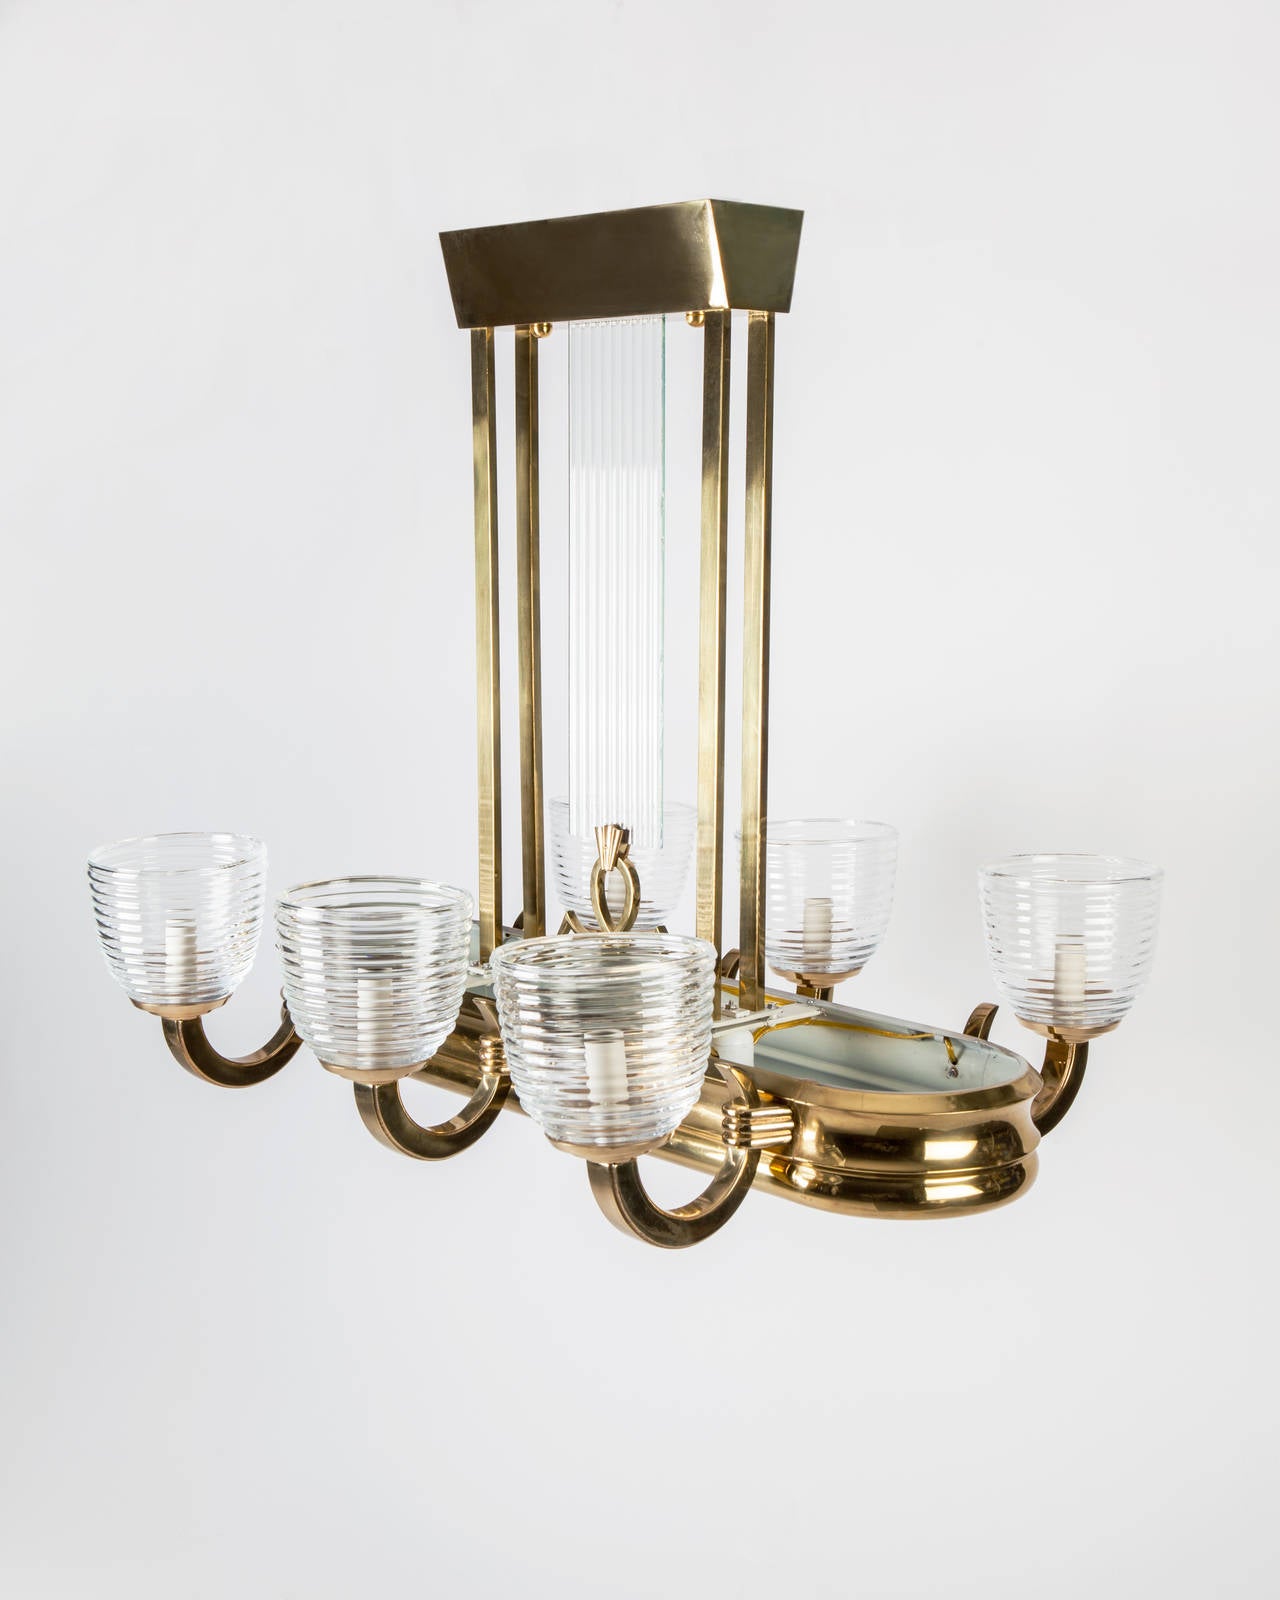 AHL3924
An antique Art Deco period chandelier with blown ribbed glass shades in an aged polished and lacquered brass finish. Due to the antique nature of this fixture, there may be some nicks or imperfections in the glass. Circa